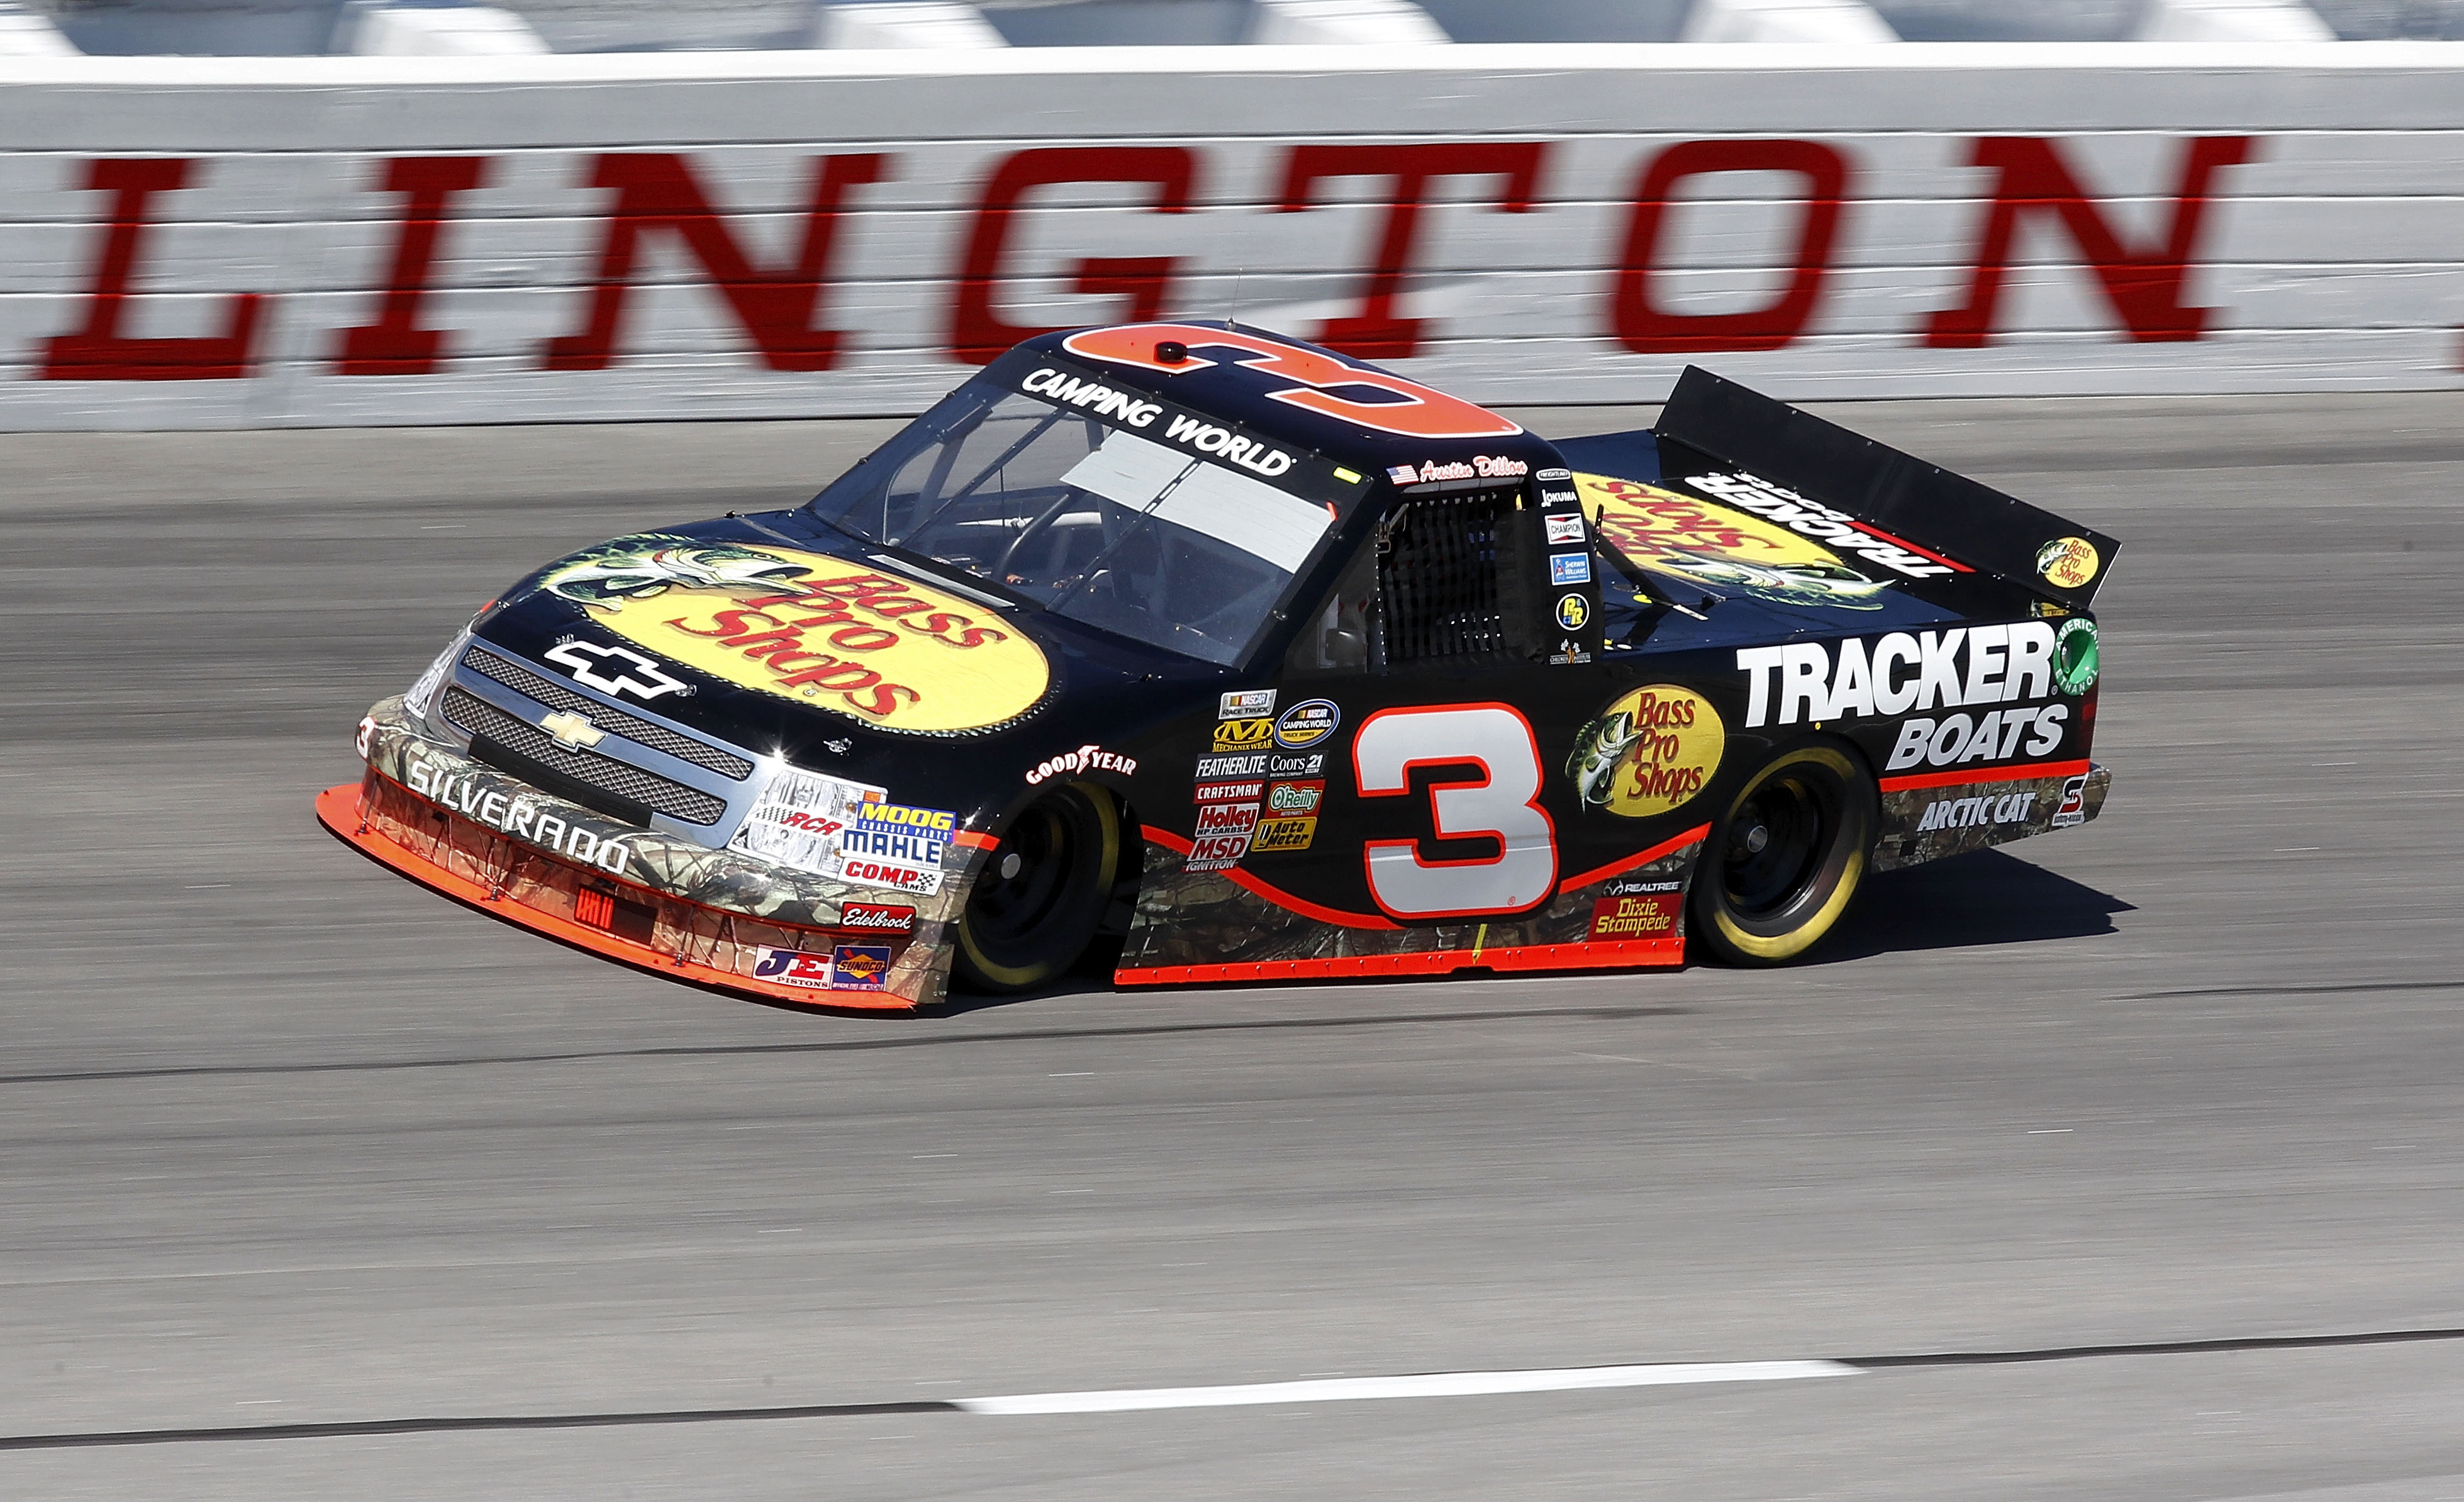 DARLINGTON, SC - MARCH 12:  Austin Dillon, driver of the #3 Bass Pro Shops Chevrolet, drives on track during practice for the Too Tough to Tame 200 at Darlington Raceway on March 12, 2011 in Darlington, South Carolina.  (Photo by Geoff Burke/Getty Images